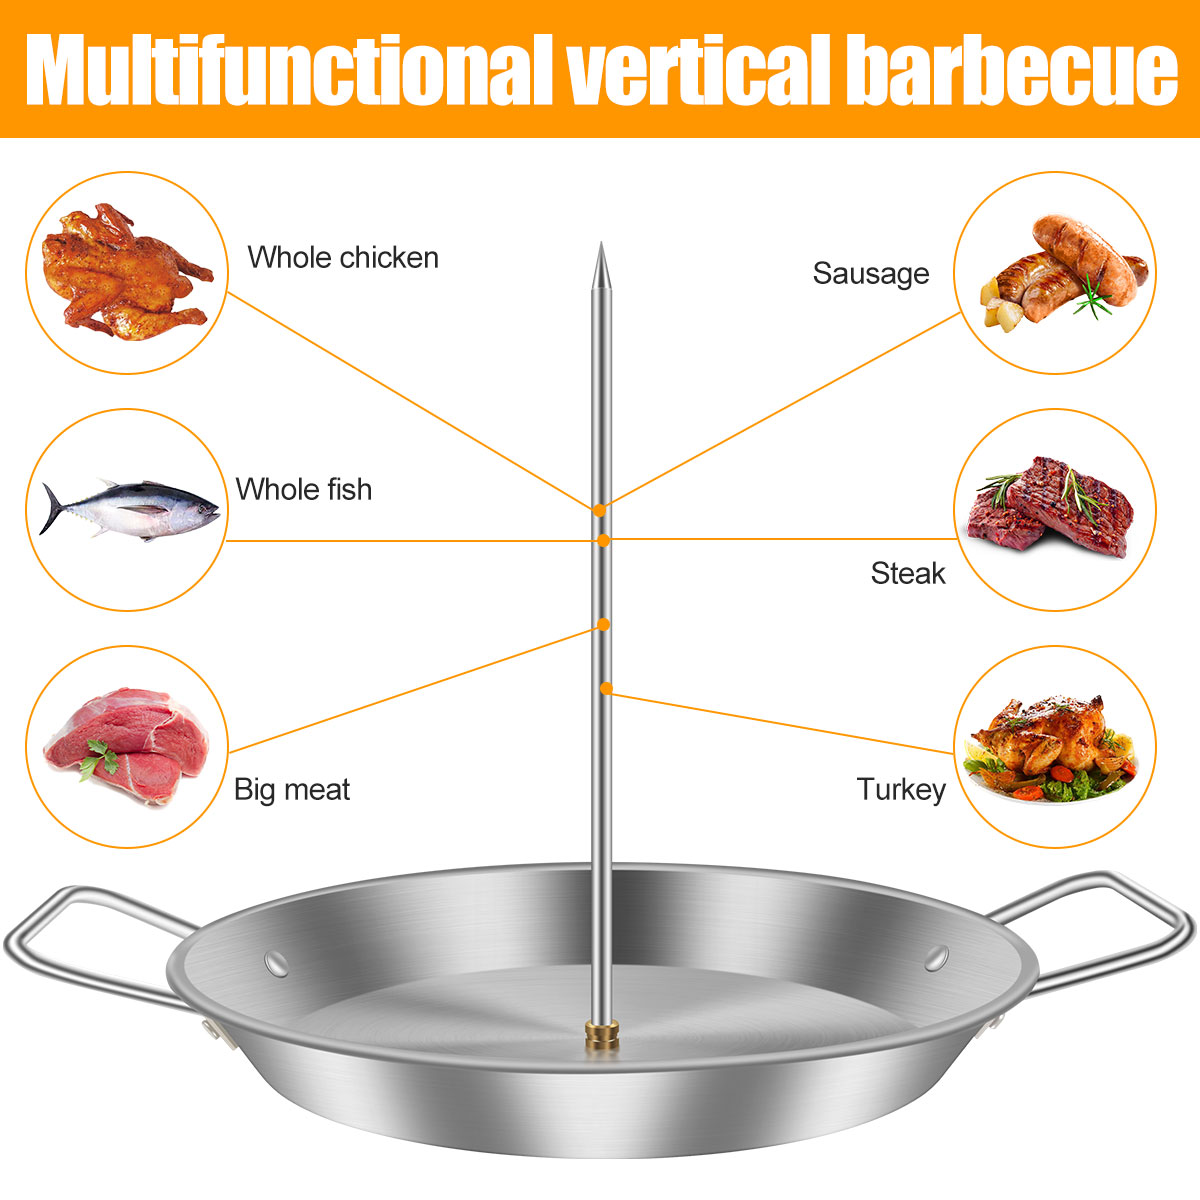 Fyeme Vertical Meat Skewer Stainless Steel BBQ Vertical Skewer Grill with 3 Replacement Spikes Barbecue Vertical Skewer Grill Rack Stand with Handle for Whole Chicken Fish Sausage Steak - image 5 of 11